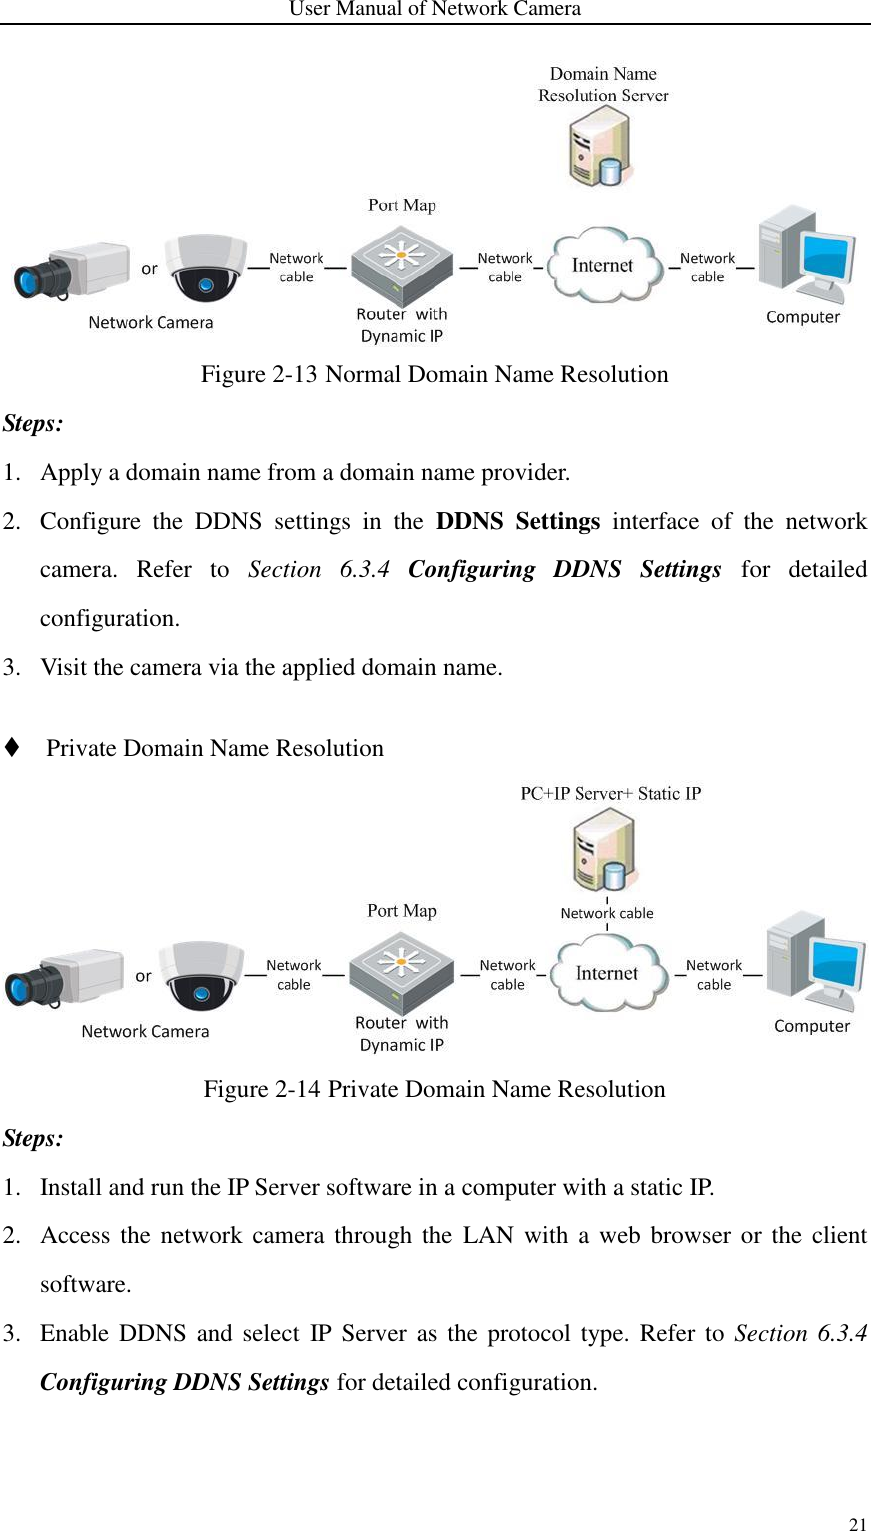 User Manual of Network Camera 21   Figure 2-13 Normal Domain Name Resolution Steps: 1. Apply a domain name from a domain name provider. 2. Configure  the  DDNS  settings  in  the  DDNS  Settings  interface  of  the  network camera.  Refer  to  Section  6.3.4  Configuring  DDNS  Settings for  detailed configuration. 3. Visit the camera via the applied domain name.   Private Domain Name Resolution  Figure 2-14 Private Domain Name Resolution Steps: 1. Install and run the IP Server software in a computer with a static IP. 2. Access the  network  camera through the  LAN  with a web browser or the client software. 3. Enable DDNS  and select  IP Server as the  protocol  type. Refer to  Section 6.3.4 Configuring DDNS Settings for detailed configuration.  